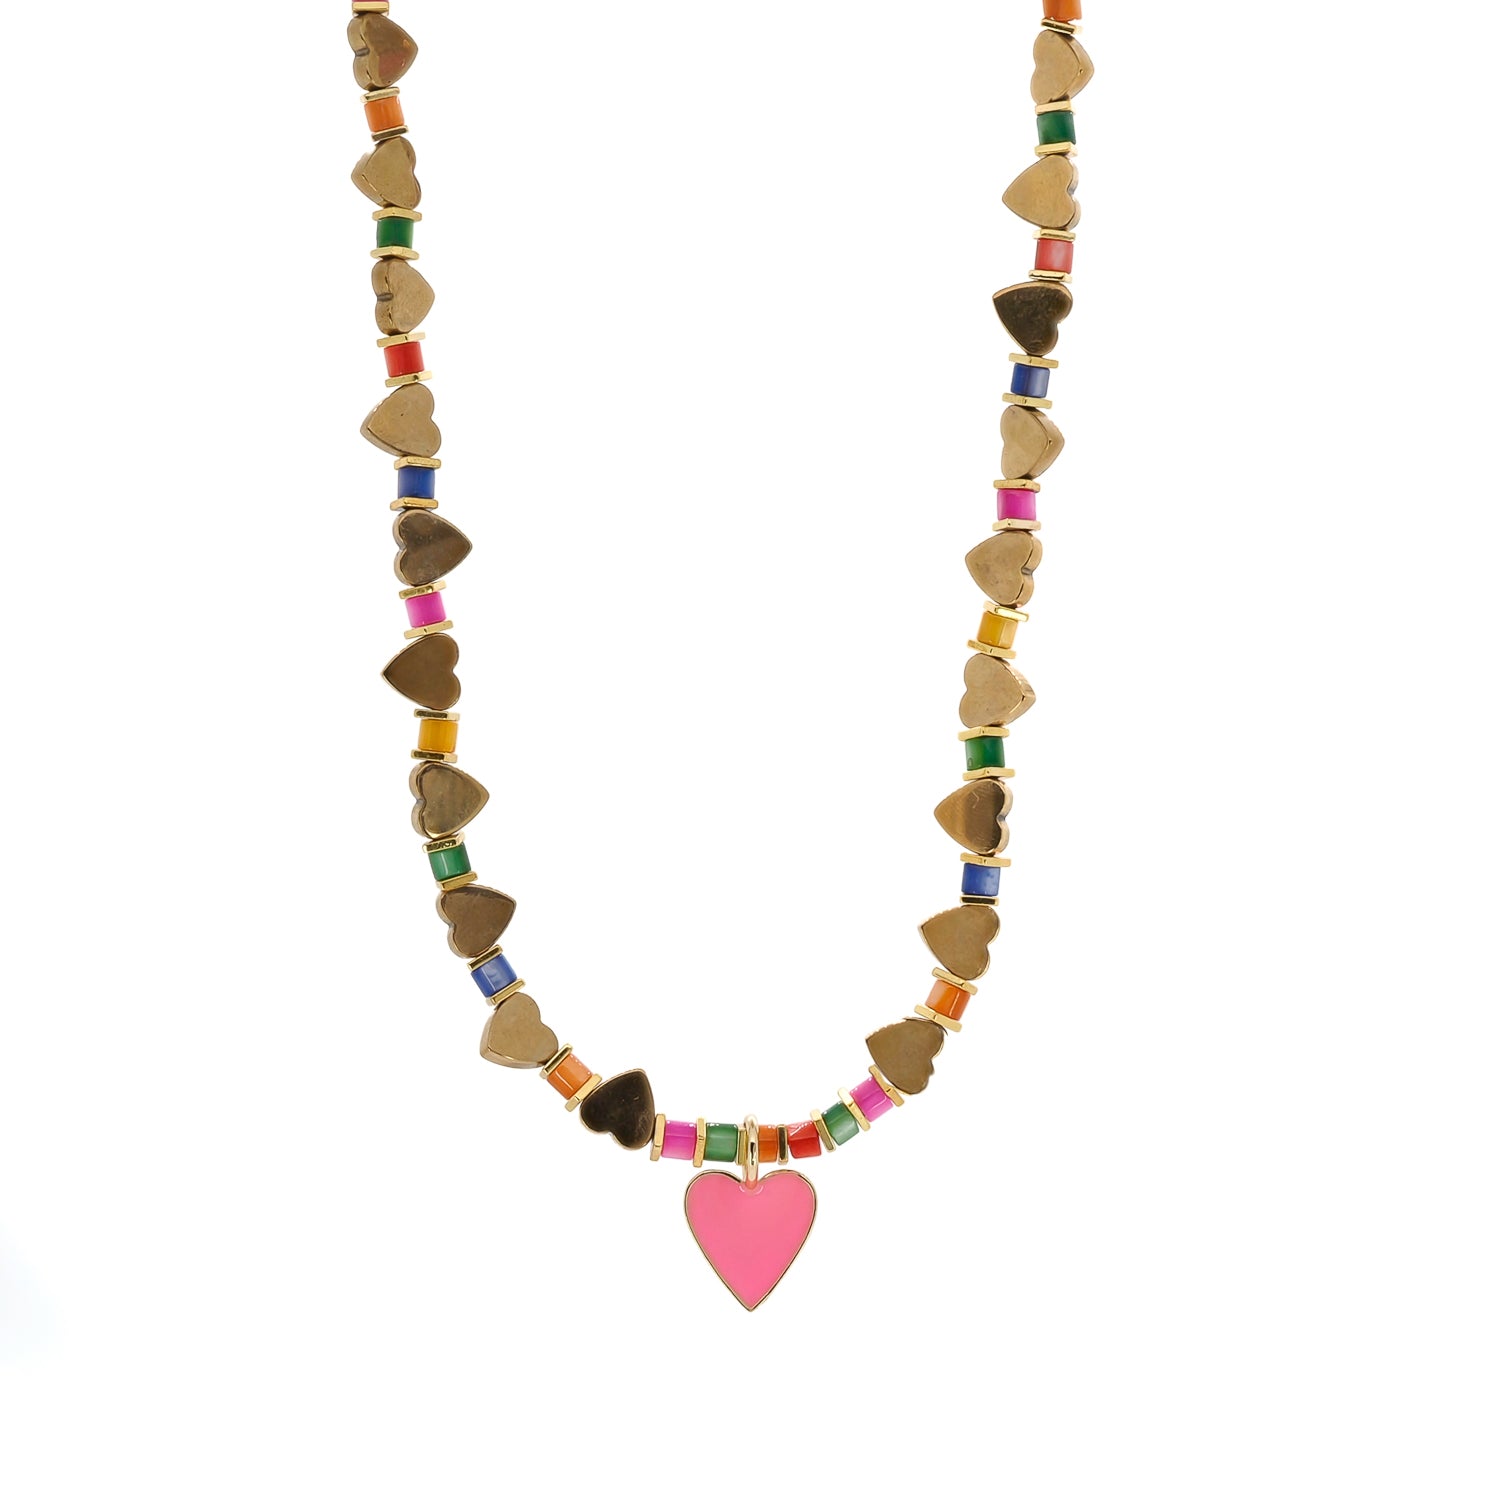 Vibrant Necklace with Pink Heart Pendant and Colorful Pearls